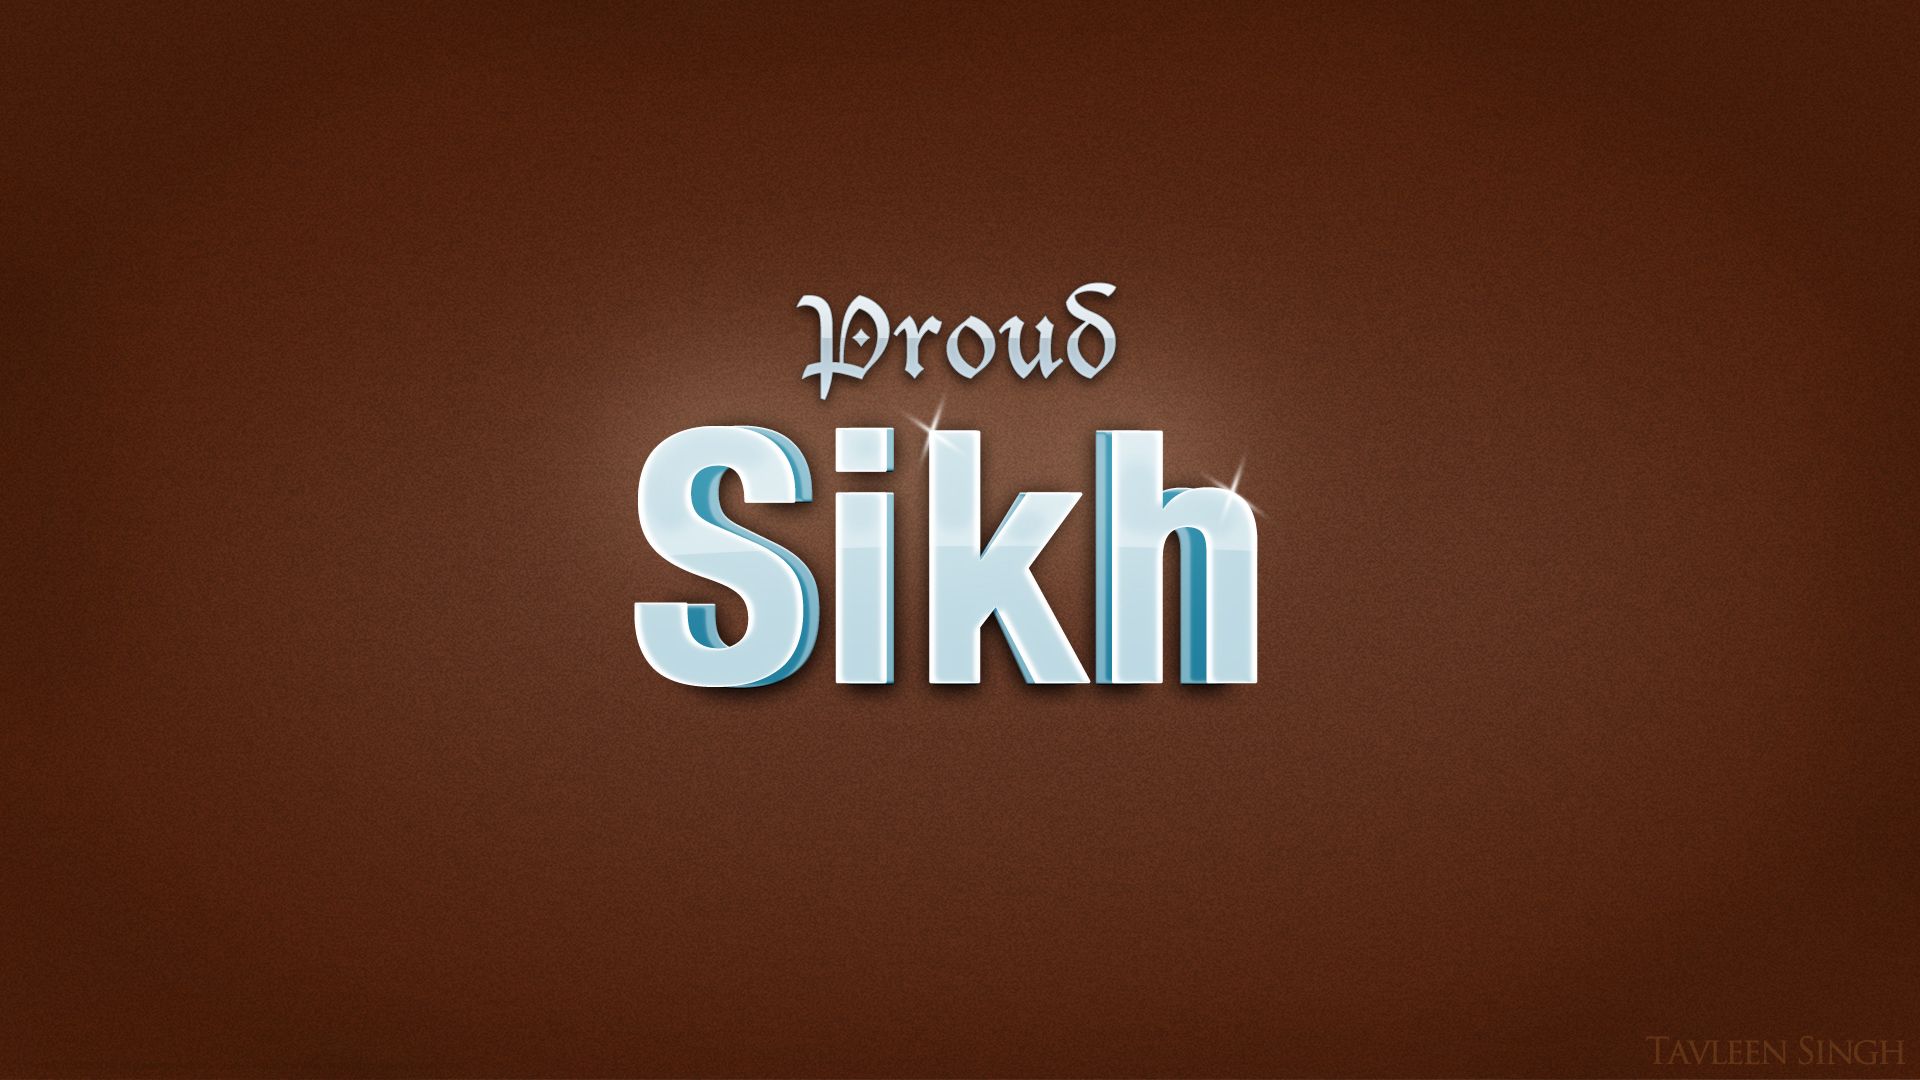 Wallpapers Dharma Proud Sikh Glass Sikhnet 1920x1080 | #1548818 ...